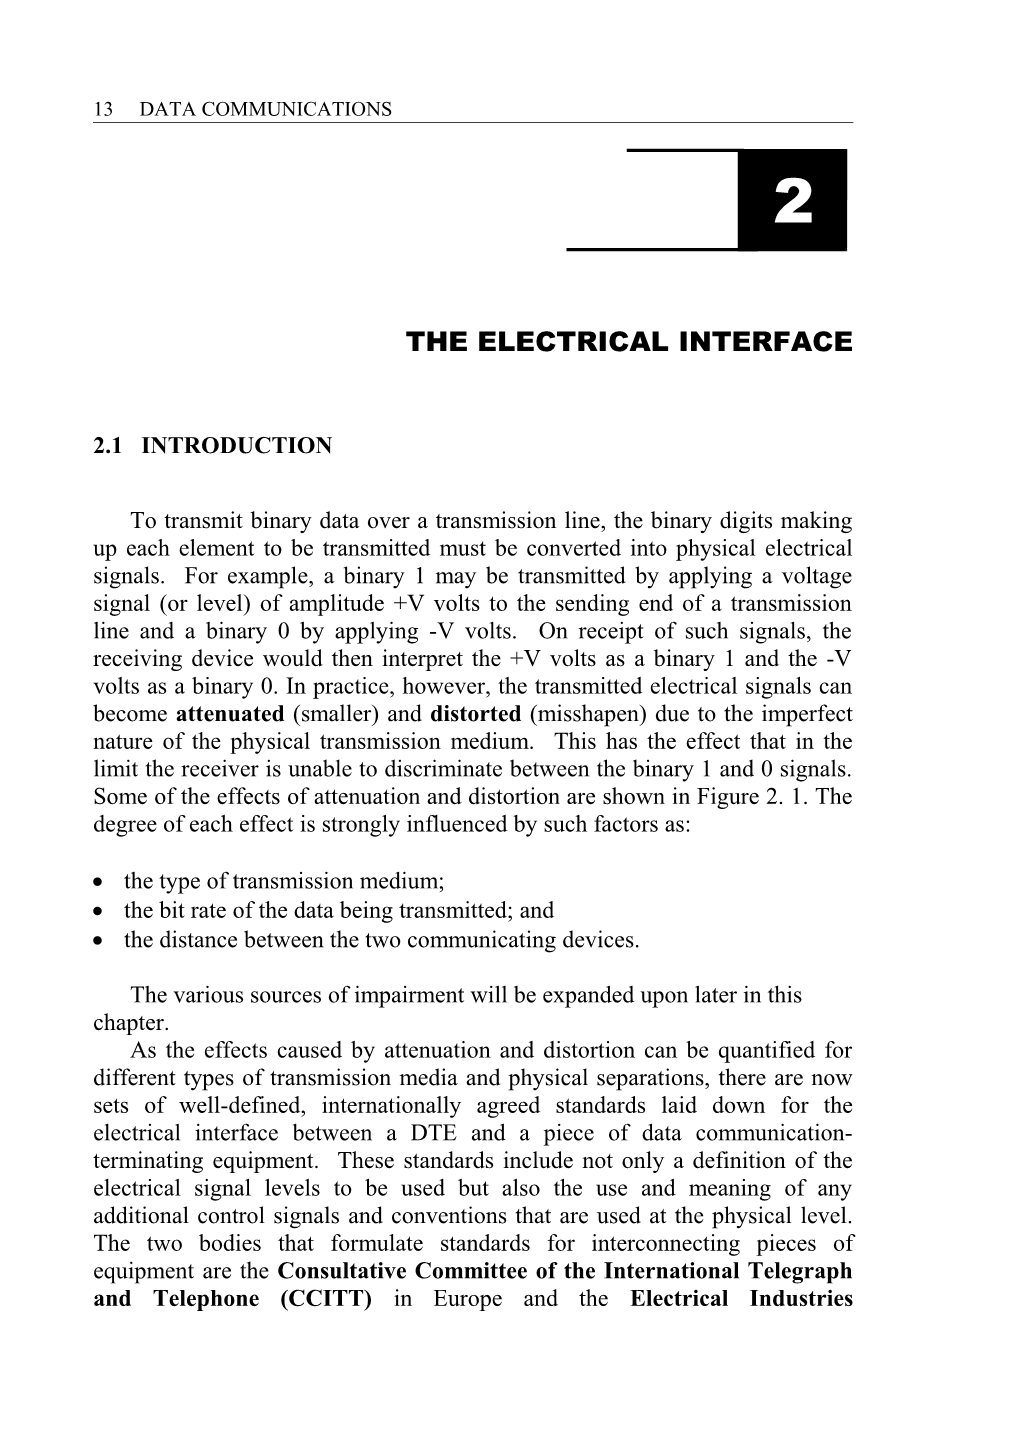 The Electrical Interface